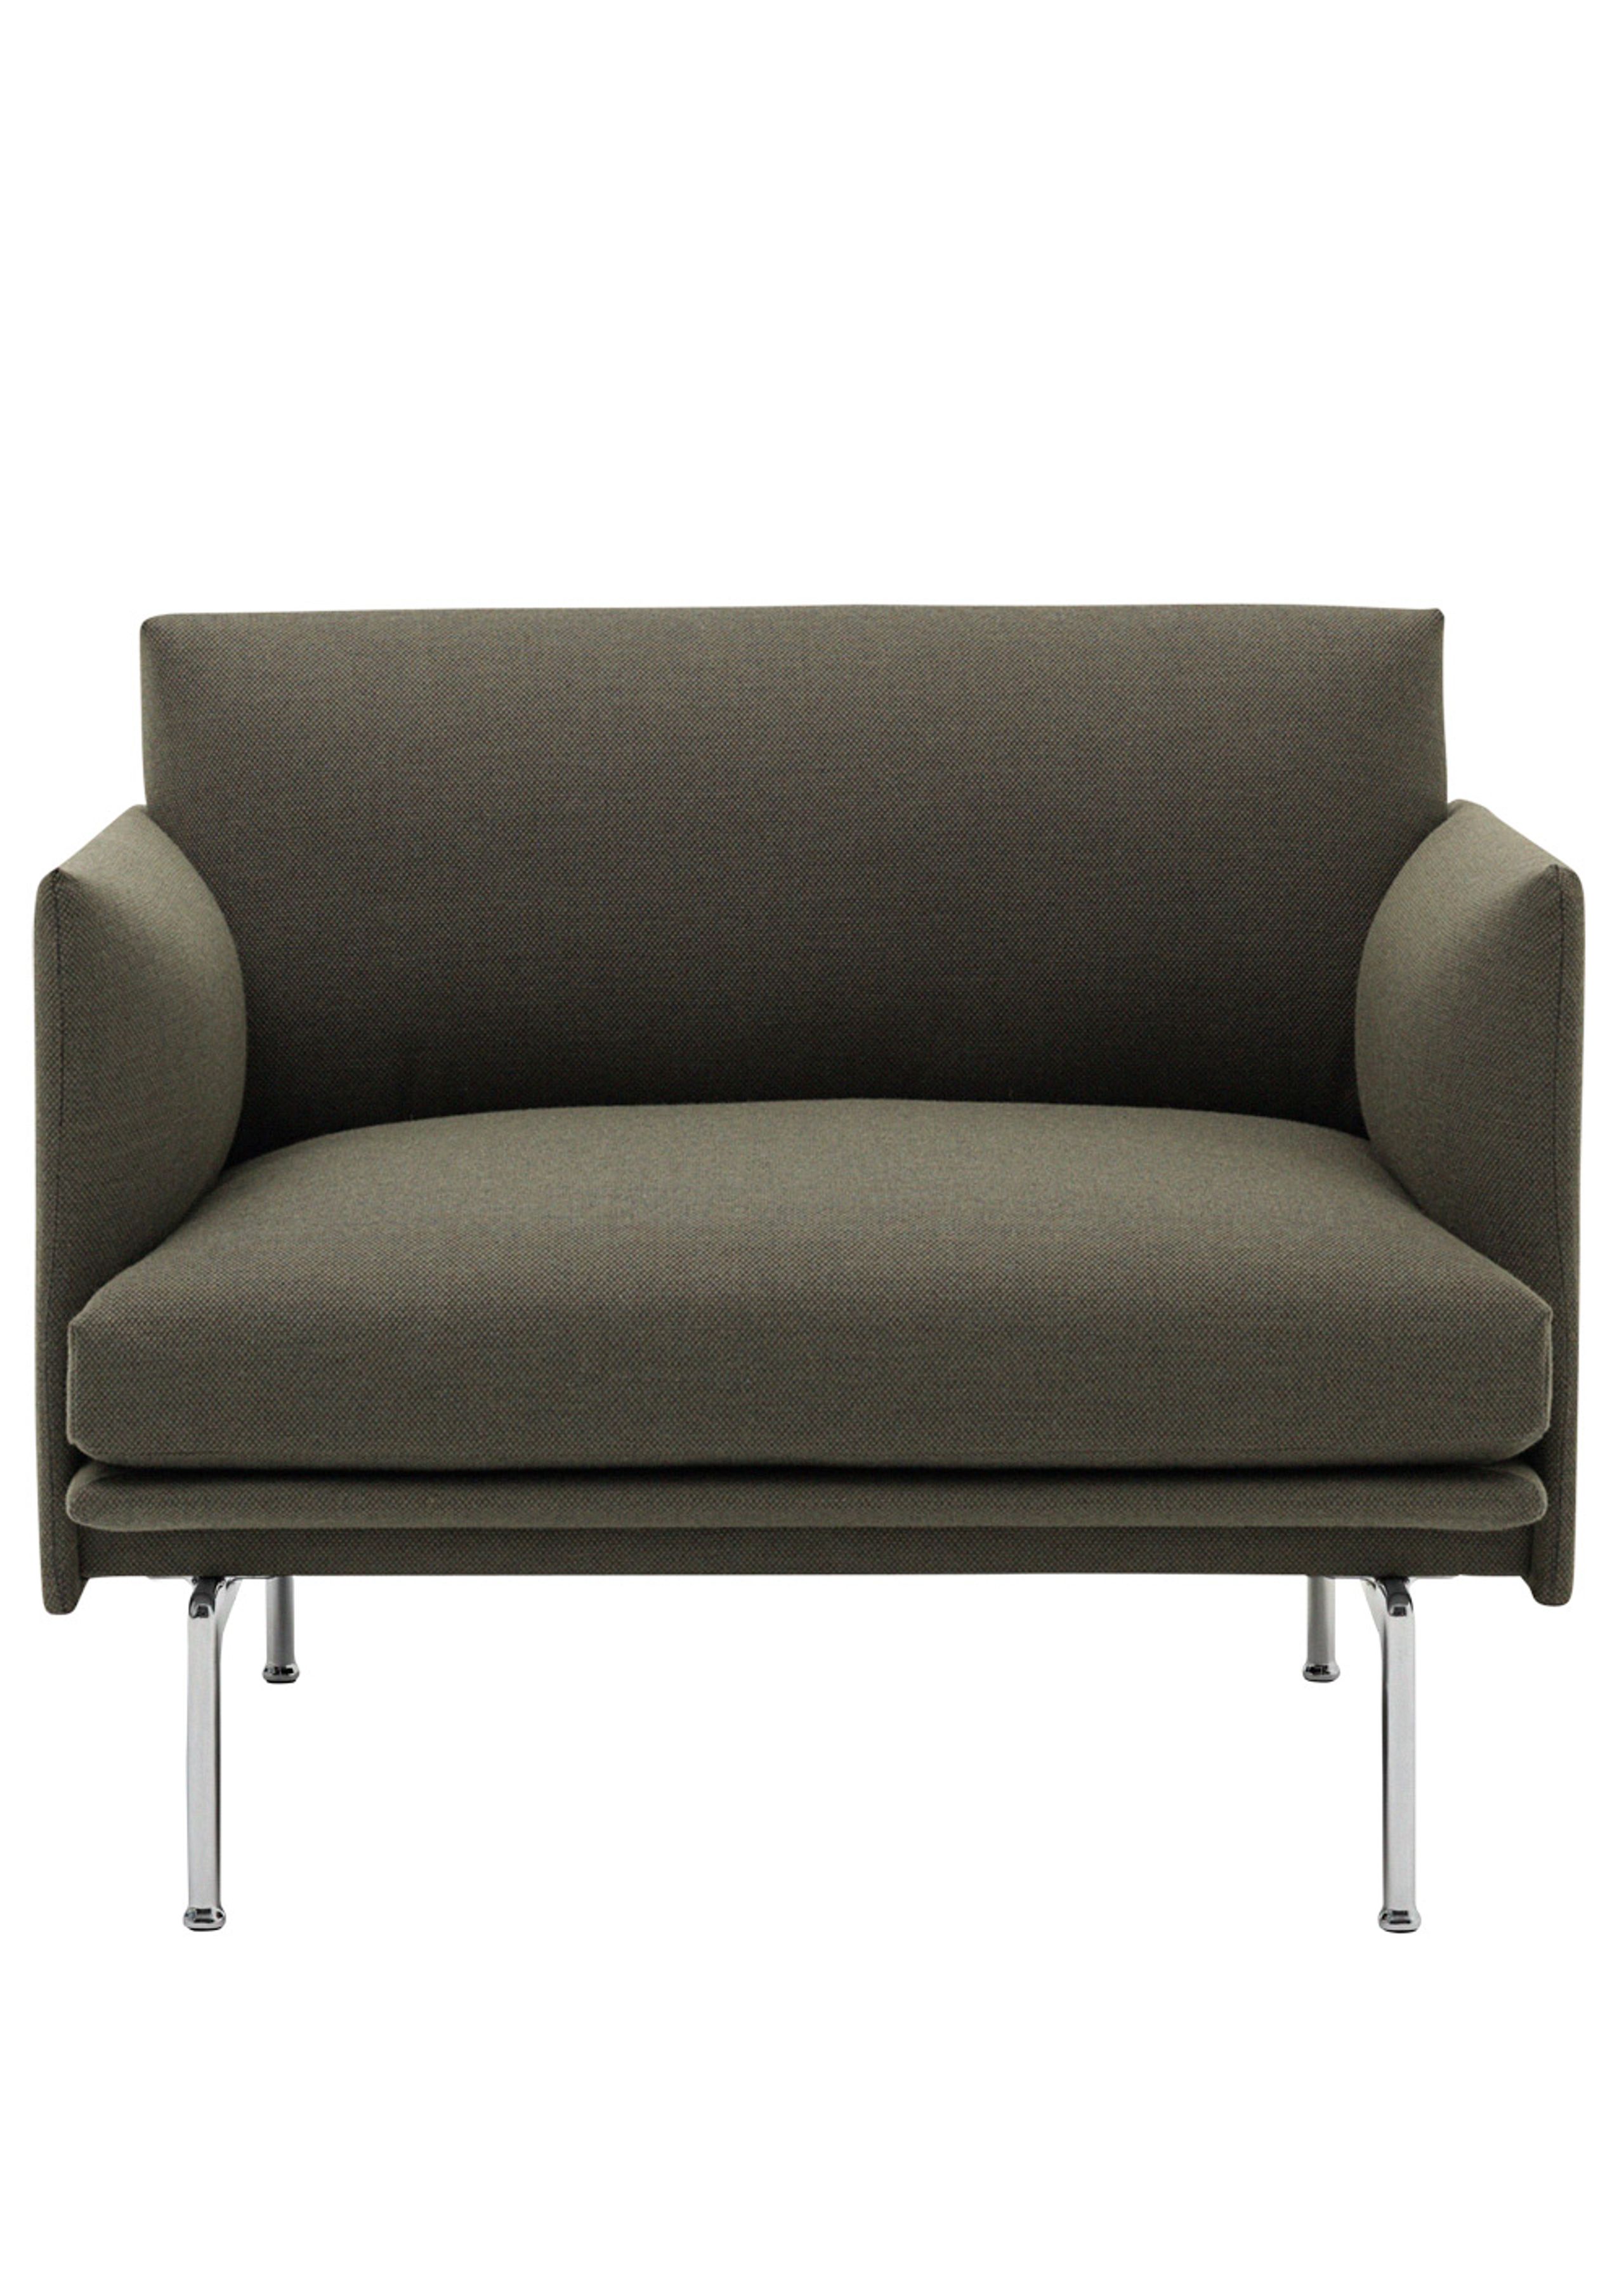 Muuto - Chaise lounge - Outline Chair - Fiord 961